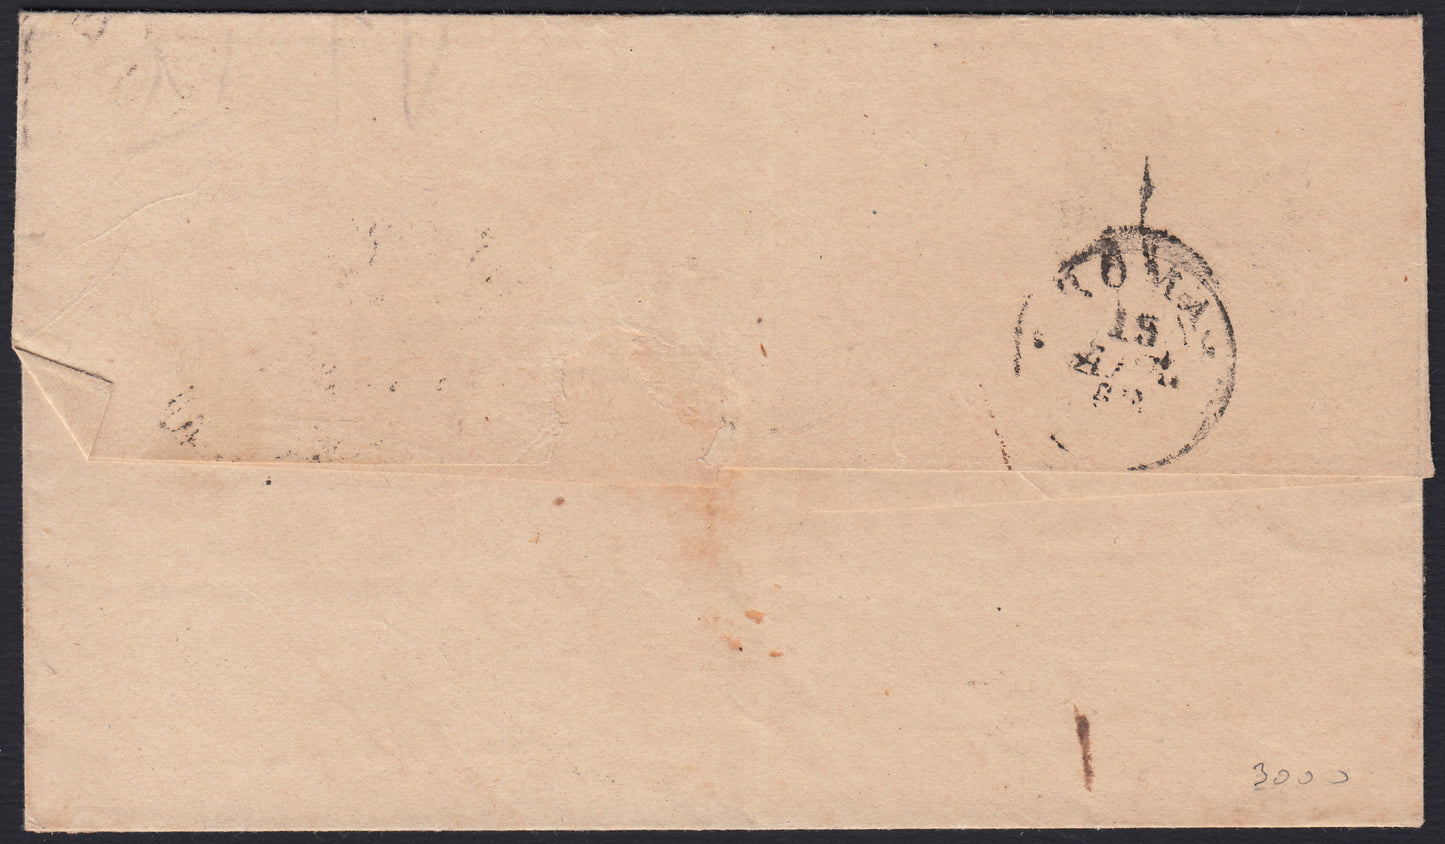 PontSP18 - 1868 - Letter sent from Frascati to Rome 15/4/68 franked with second issue c. 5 light blue two copies of which one with "diversity of dots after the digit" variety (16a + 16b)